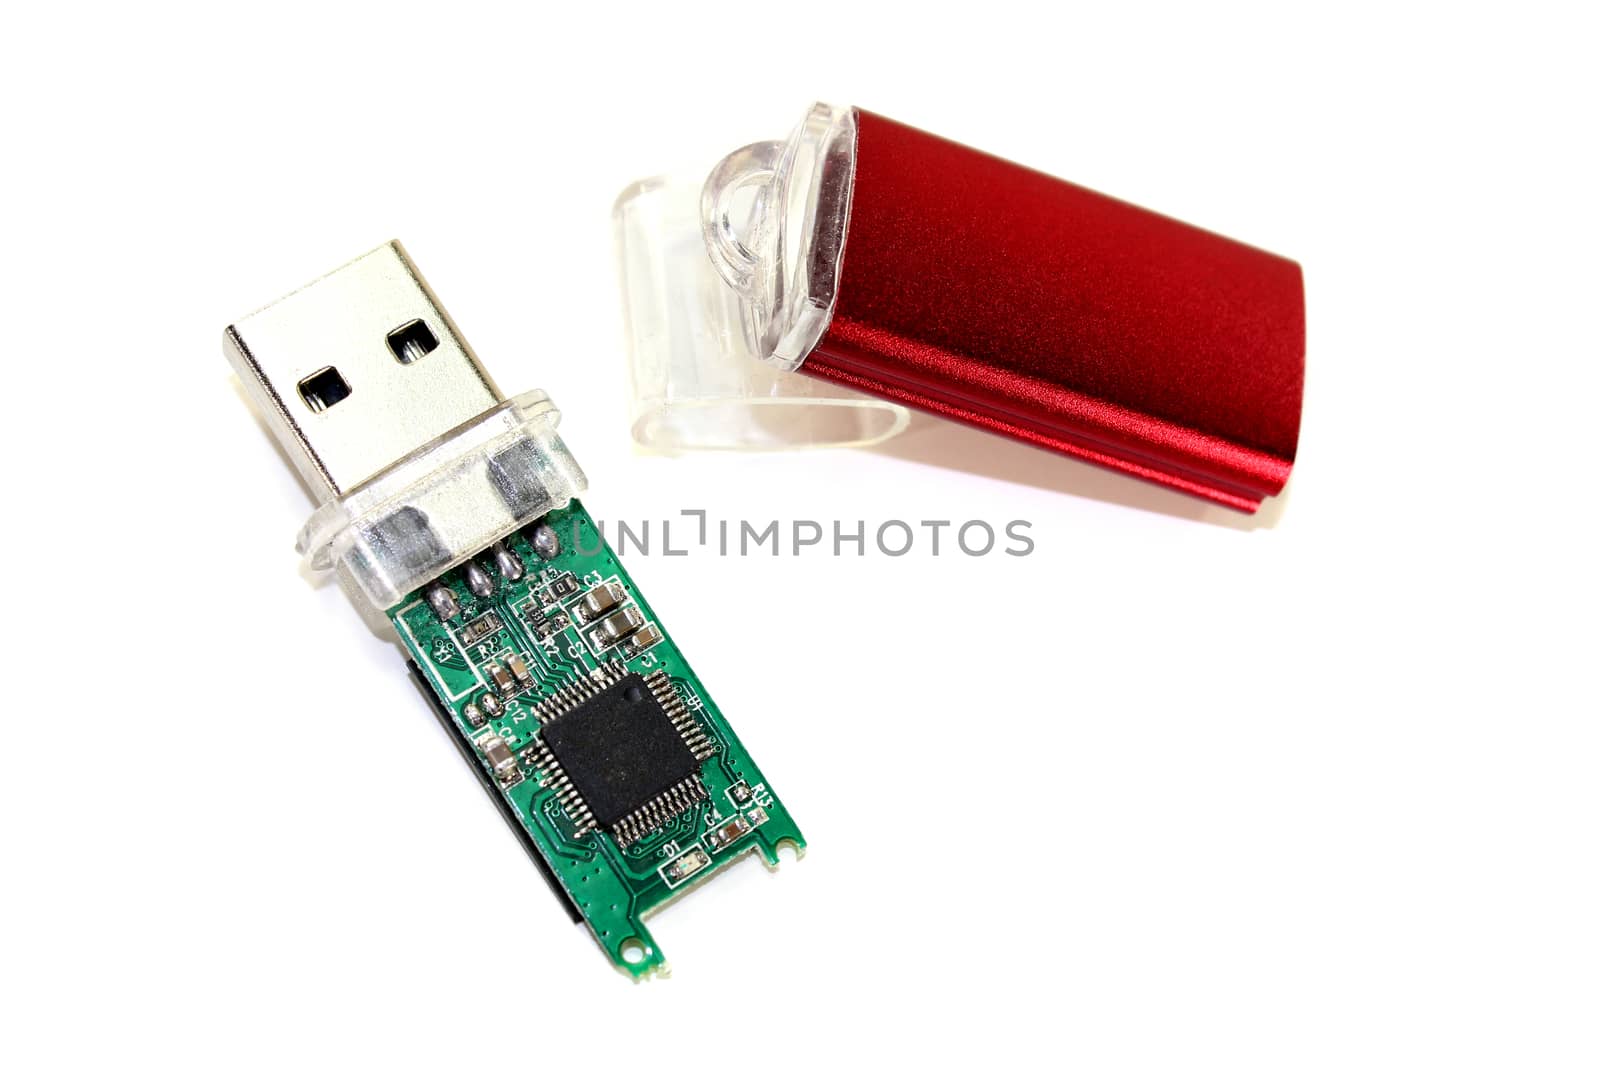 little USB flash drive by discovery